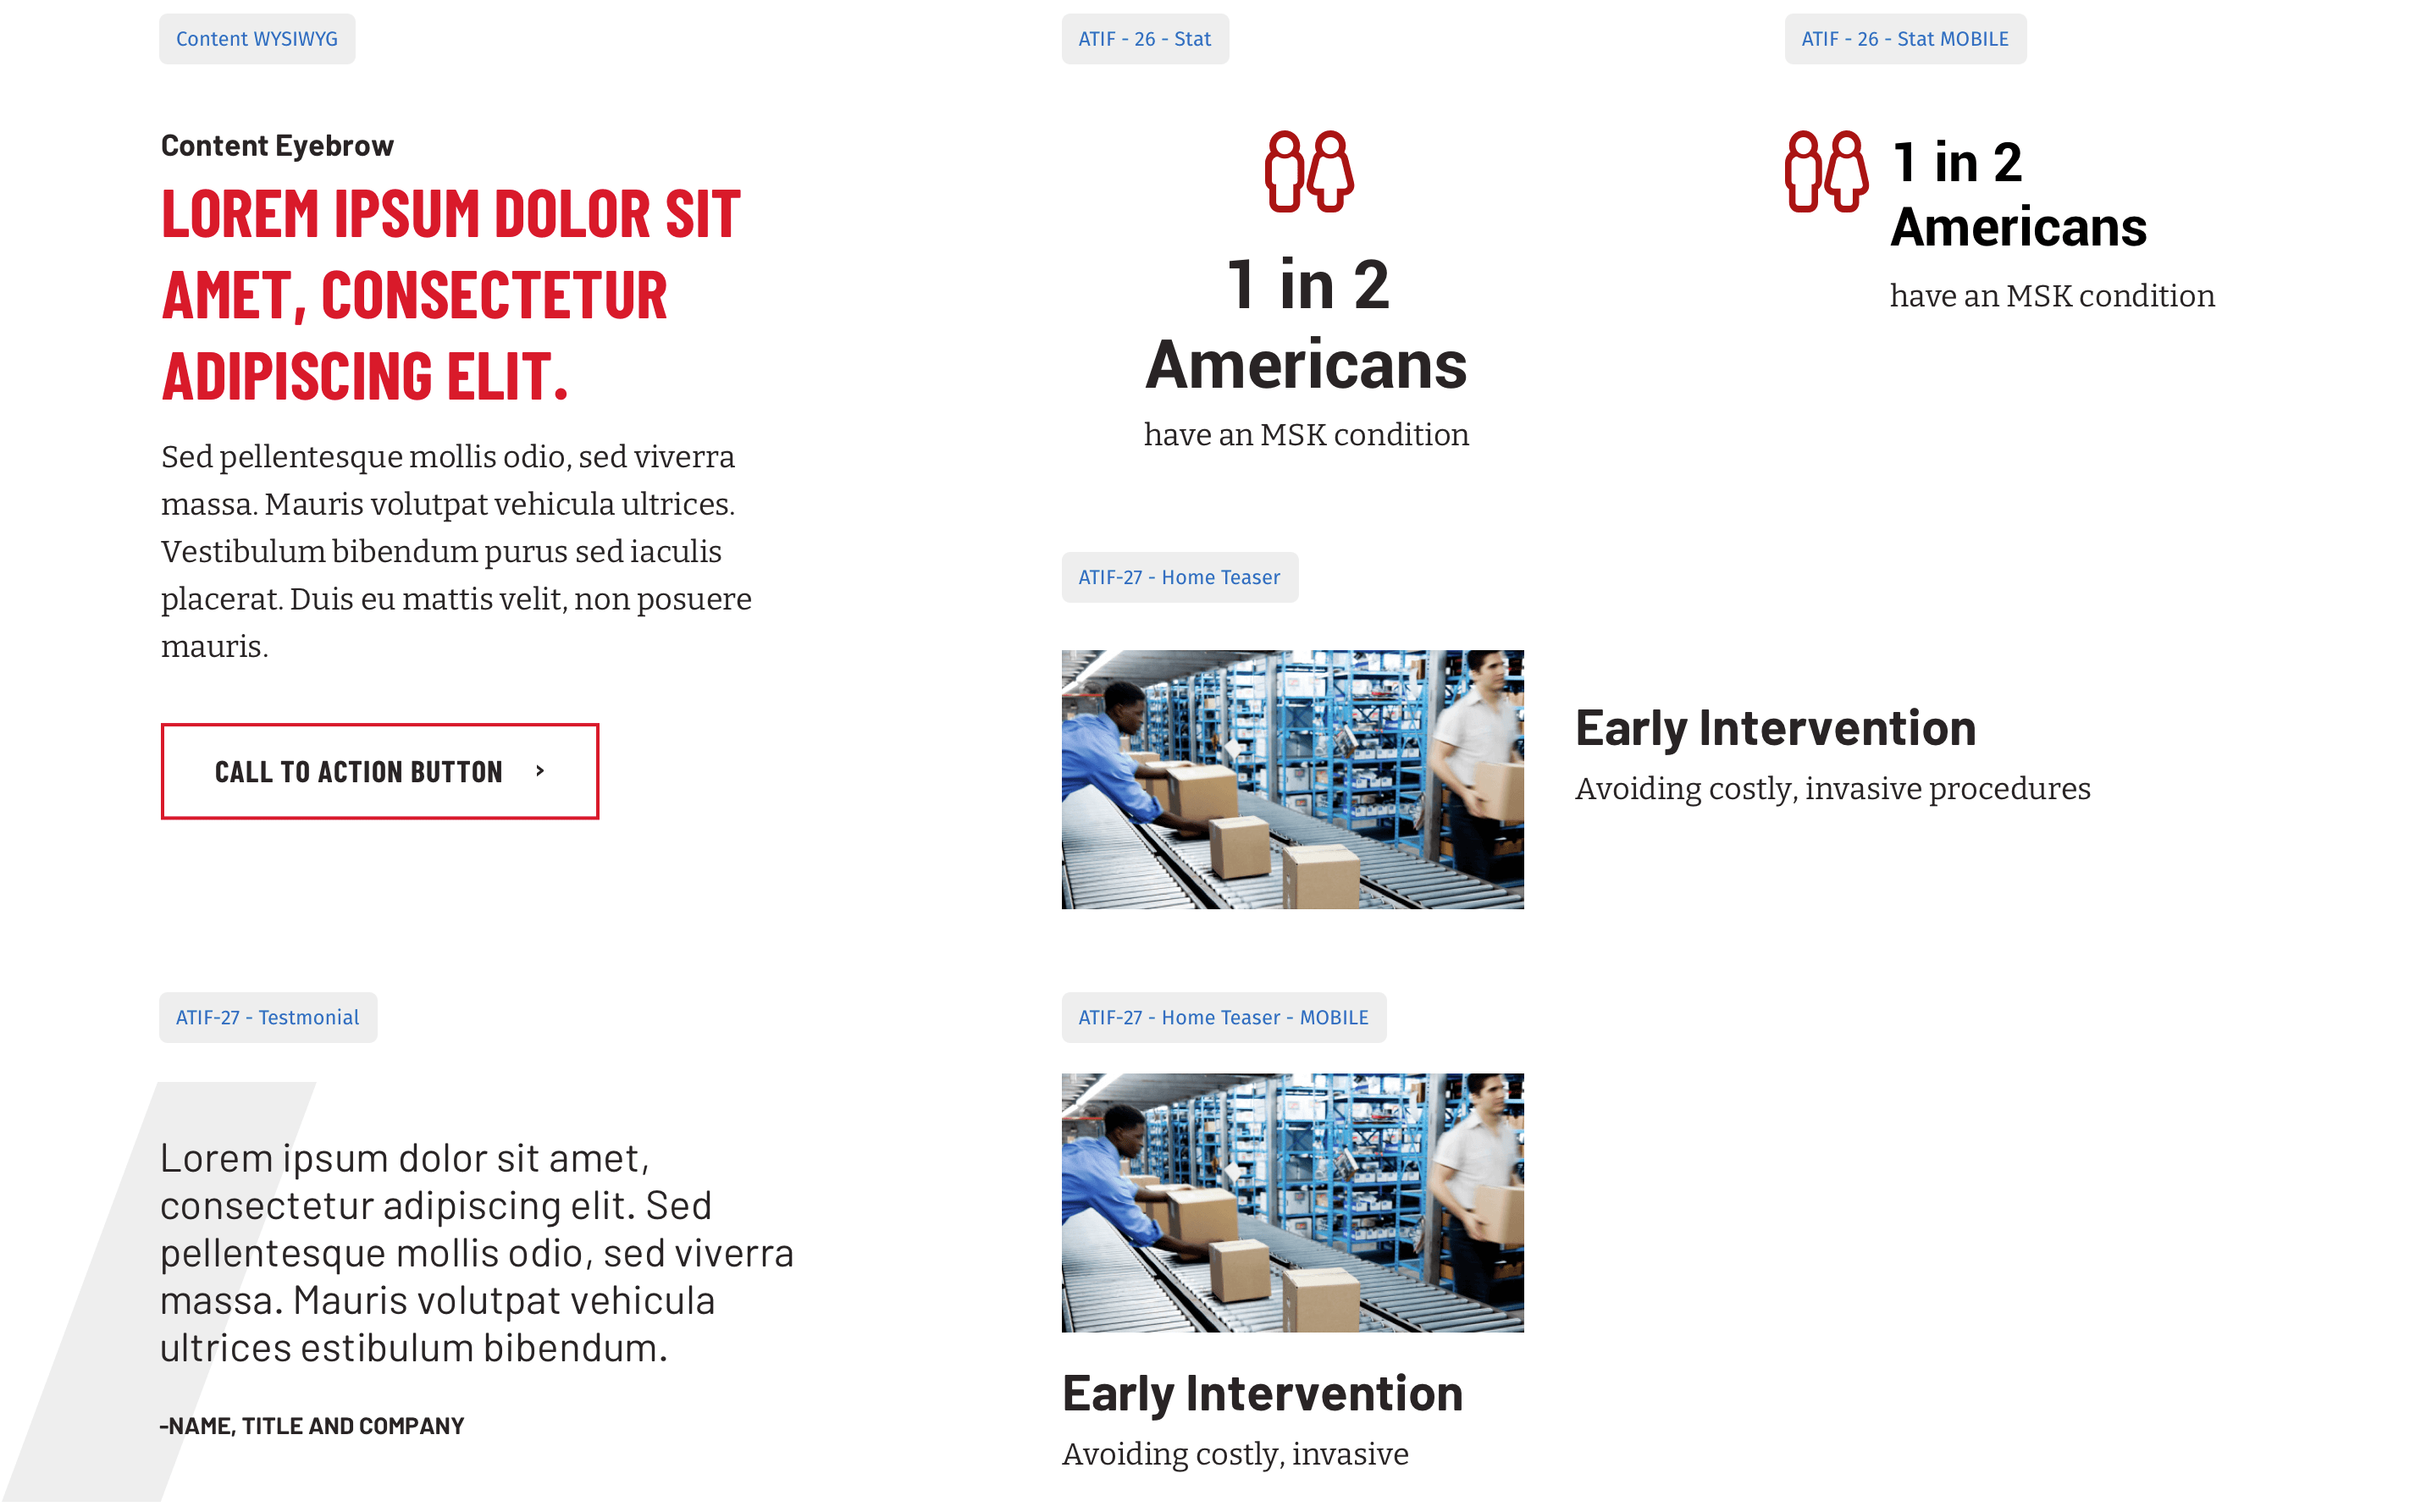 A page of design patterns for the ATI First website. Each element has a label.